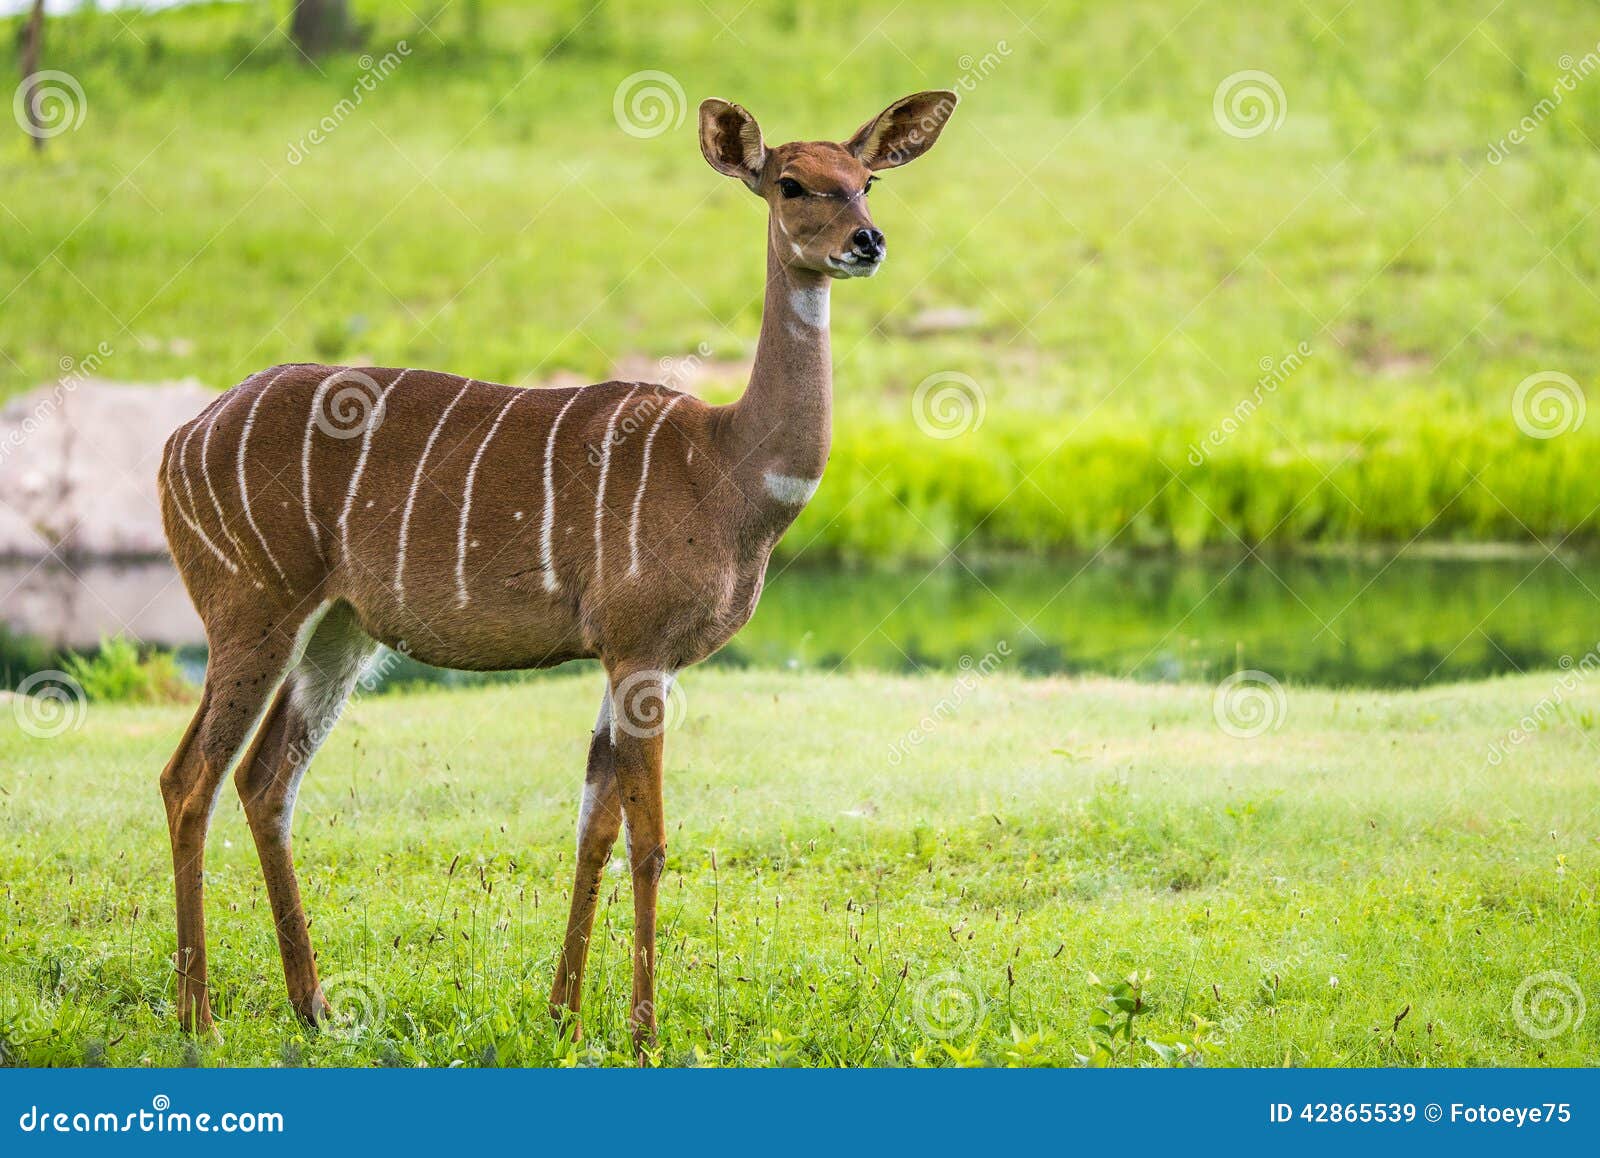 lesser kudu from africa